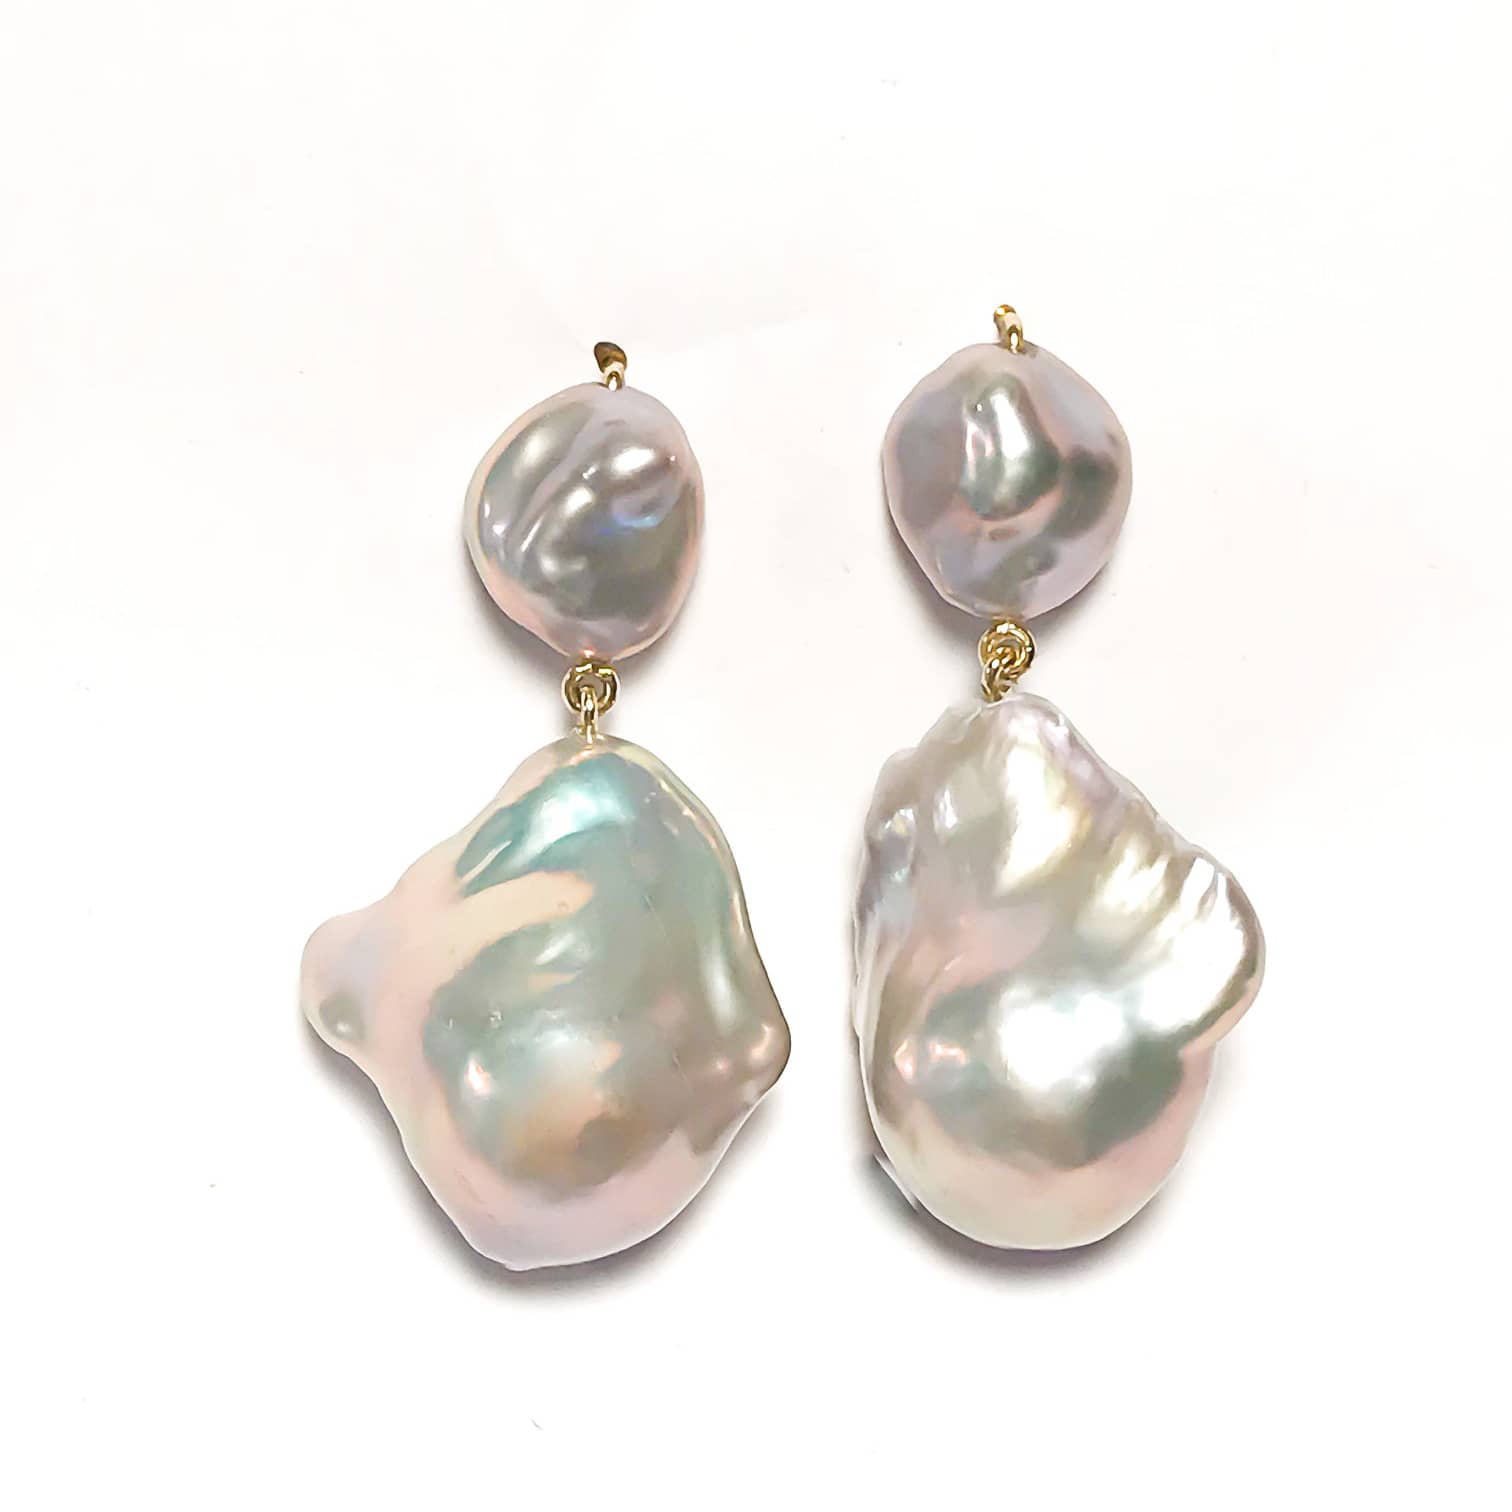 Baroque 14 kt gold freshwater pearl earrings, top view.